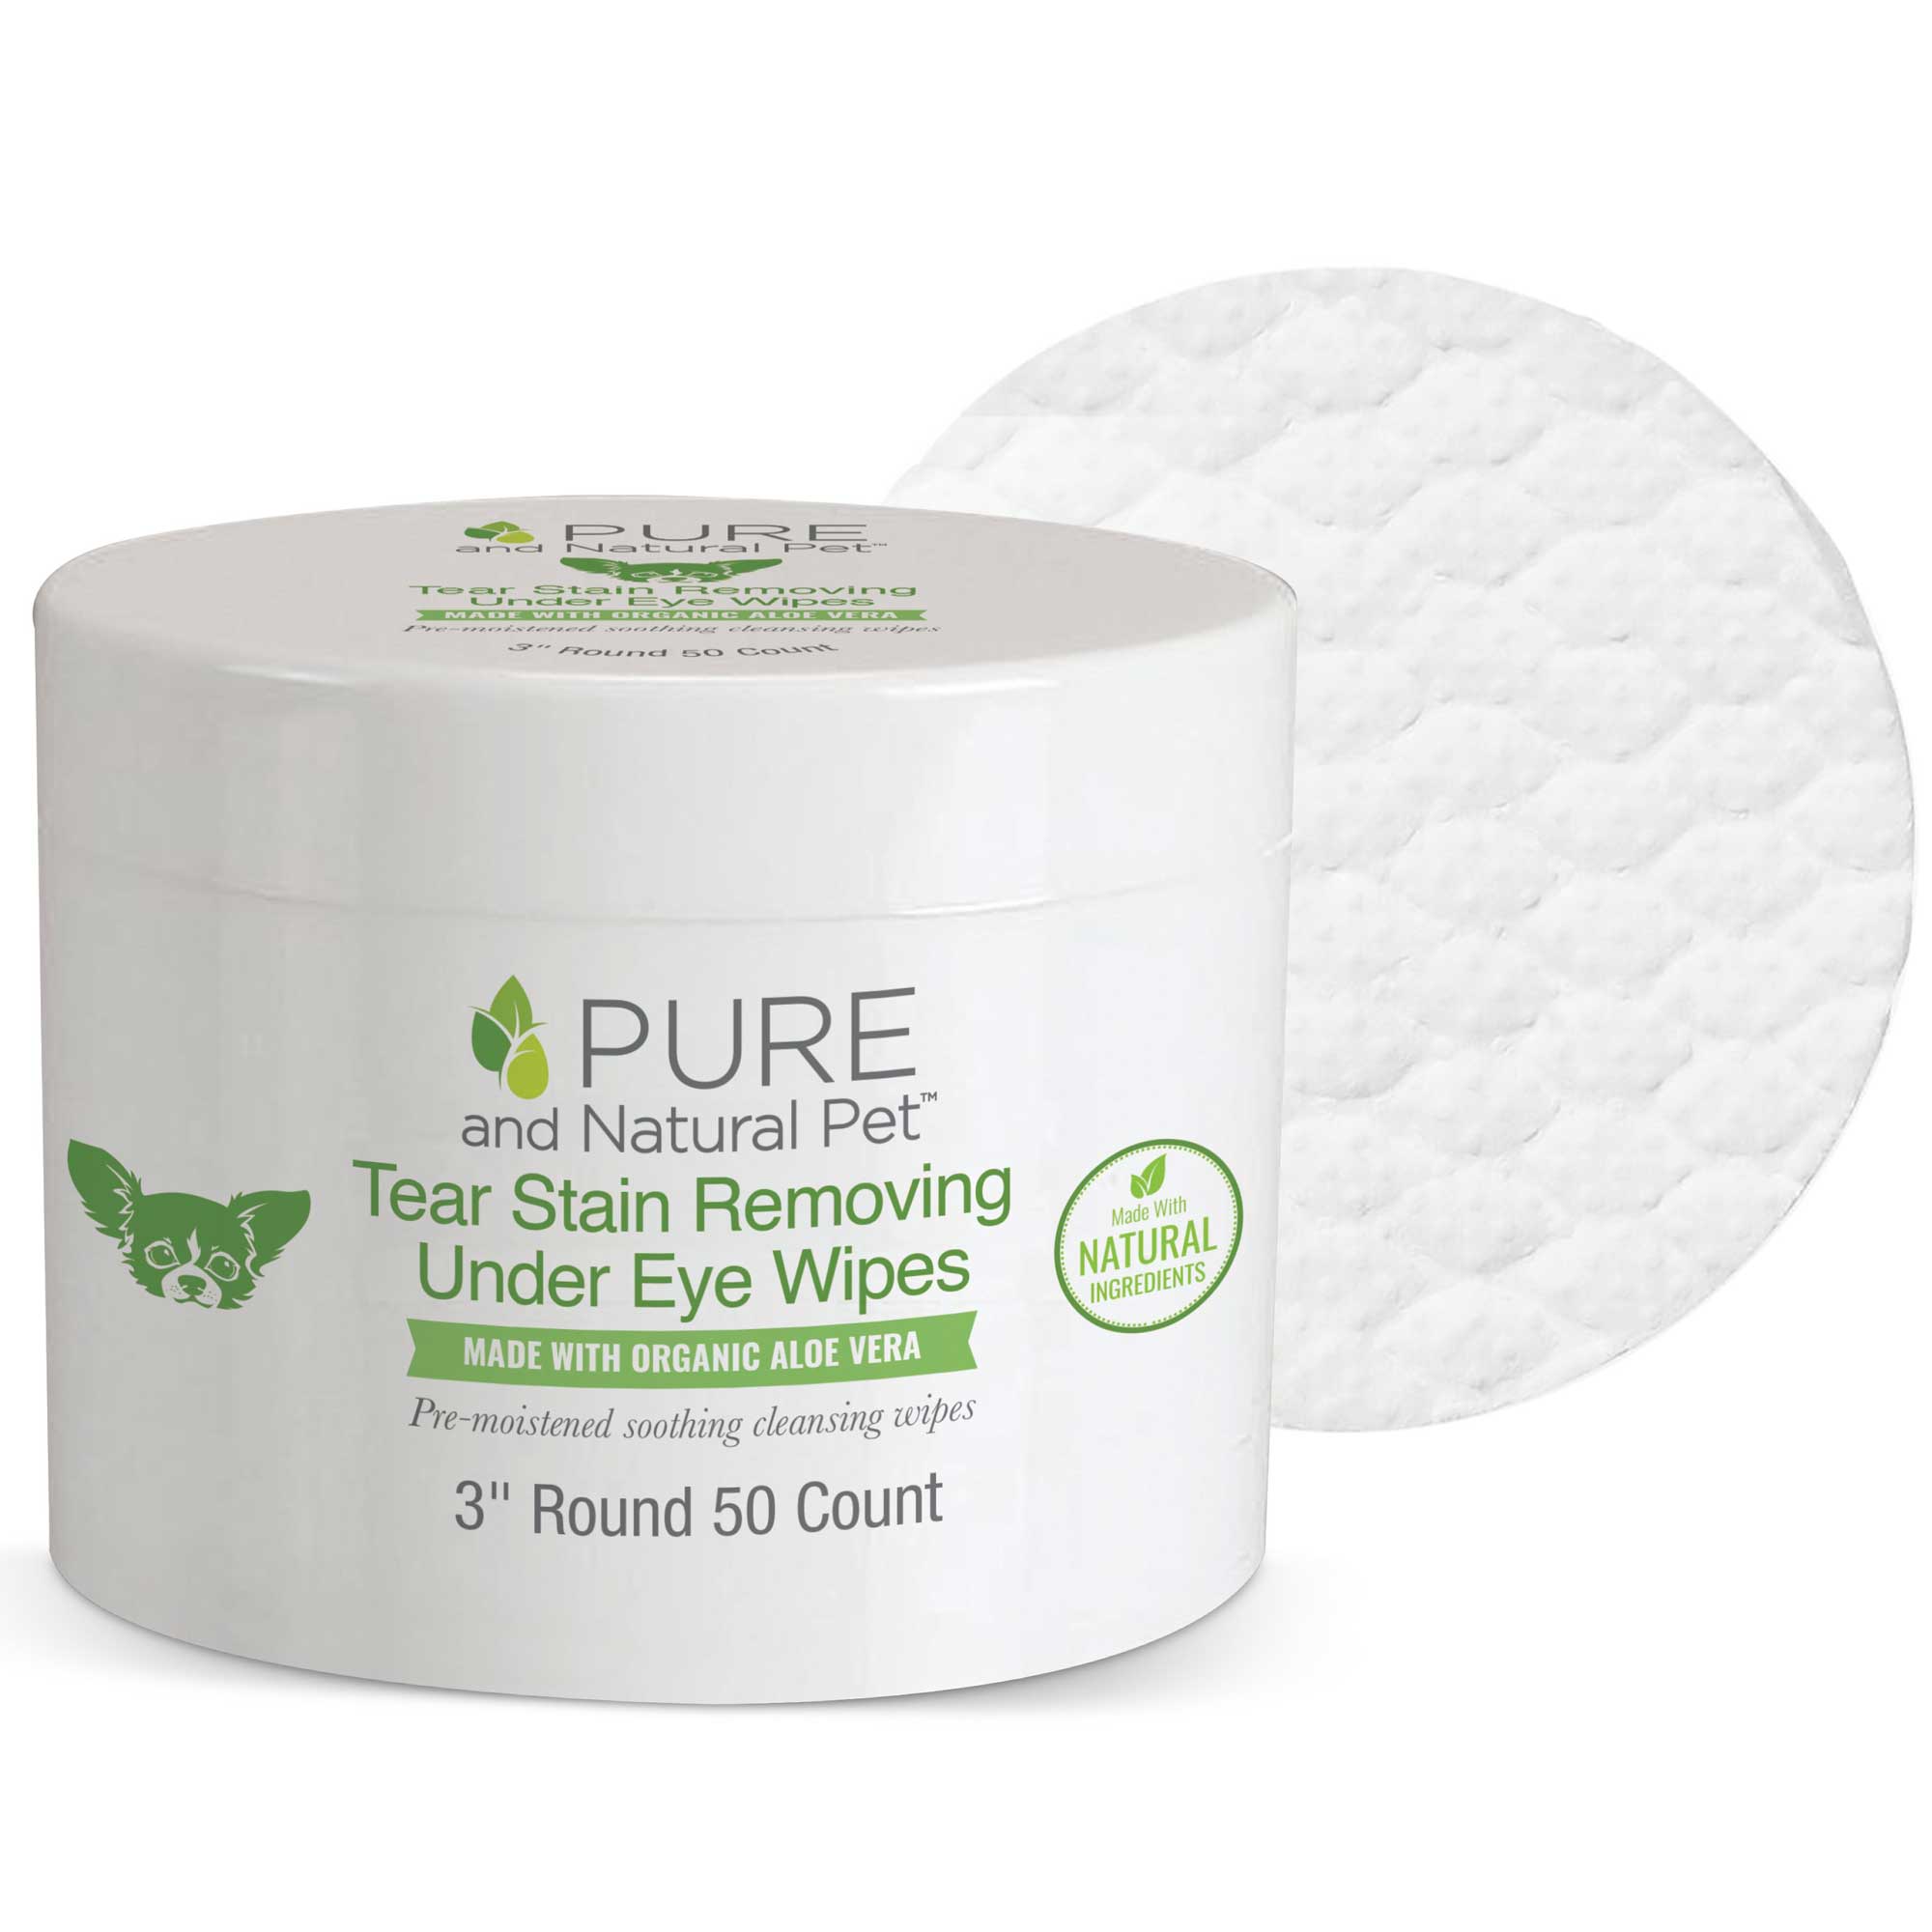 Pure and Natural Pet Tear Stain Removing Under Eye Wipes Usage